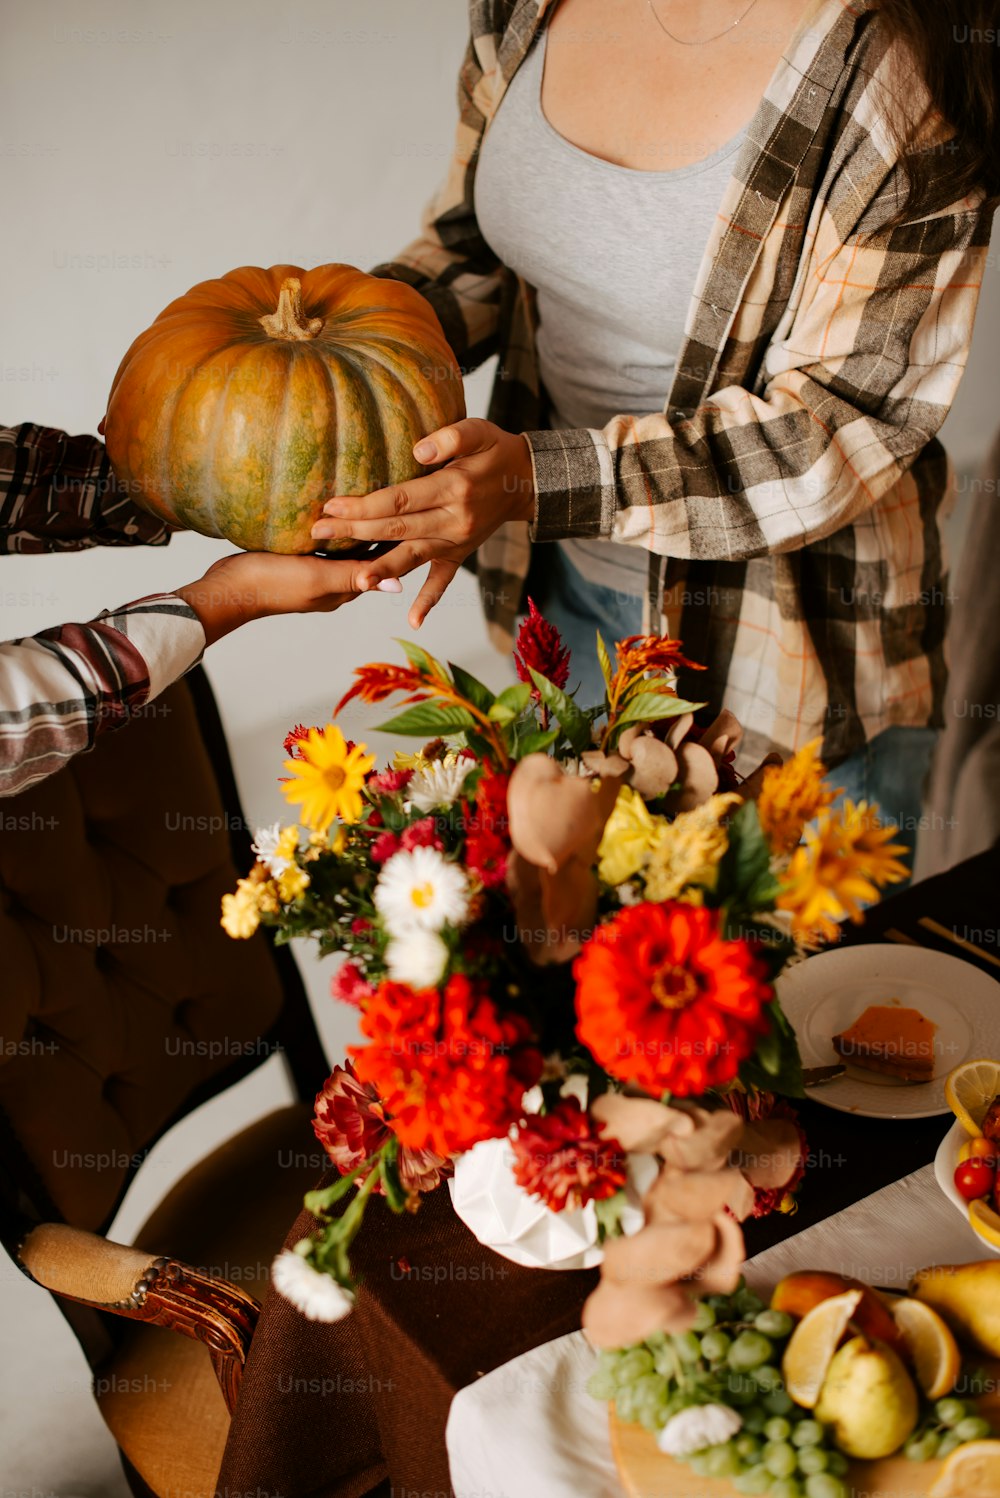 a woman holding a pumpkin over a table filled with flowers